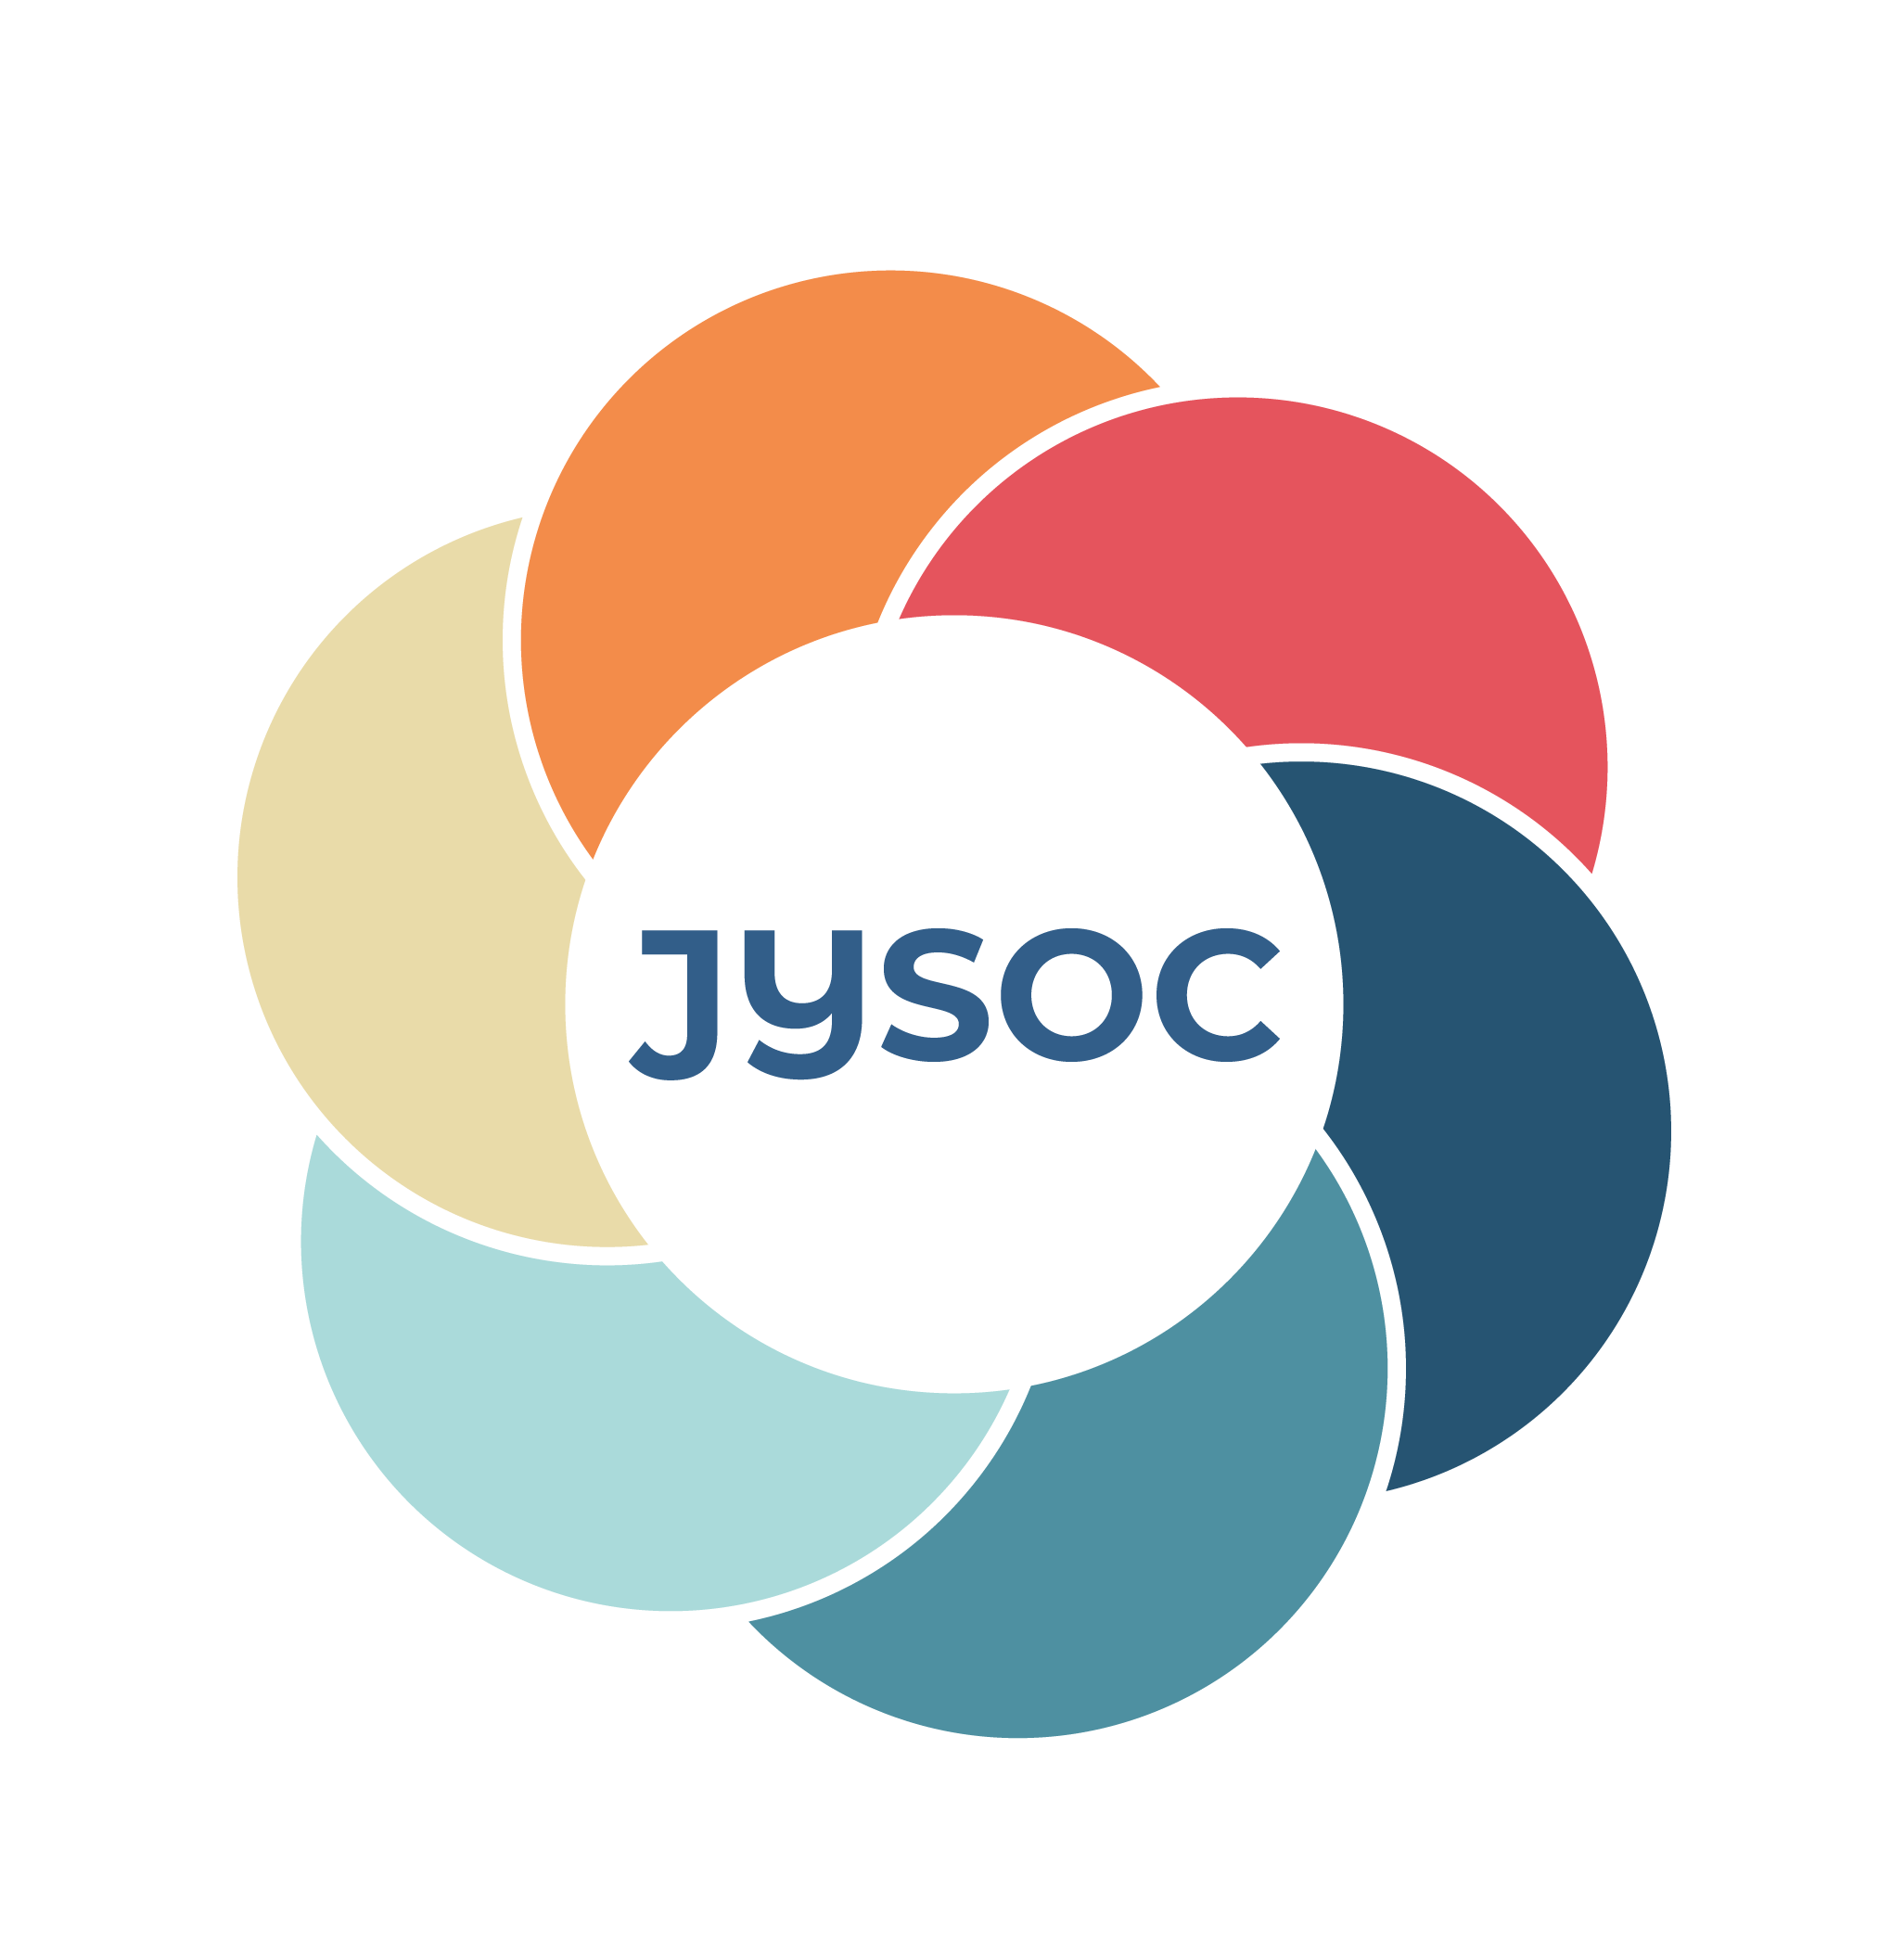 Jackson Youth System of Care